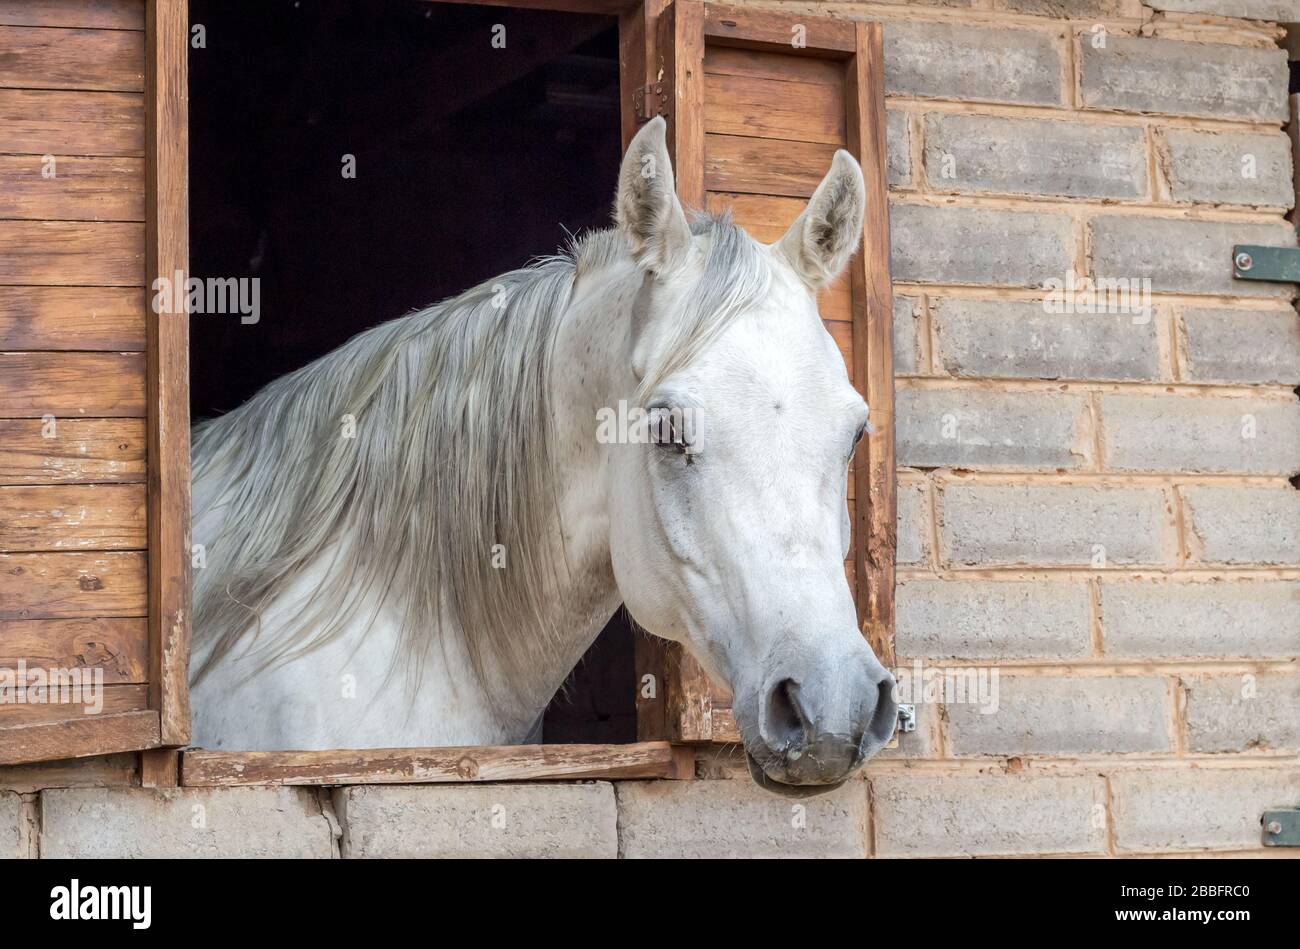 Beautiful Arabian Horse Looking Out Of Stall Window At Brick Stable